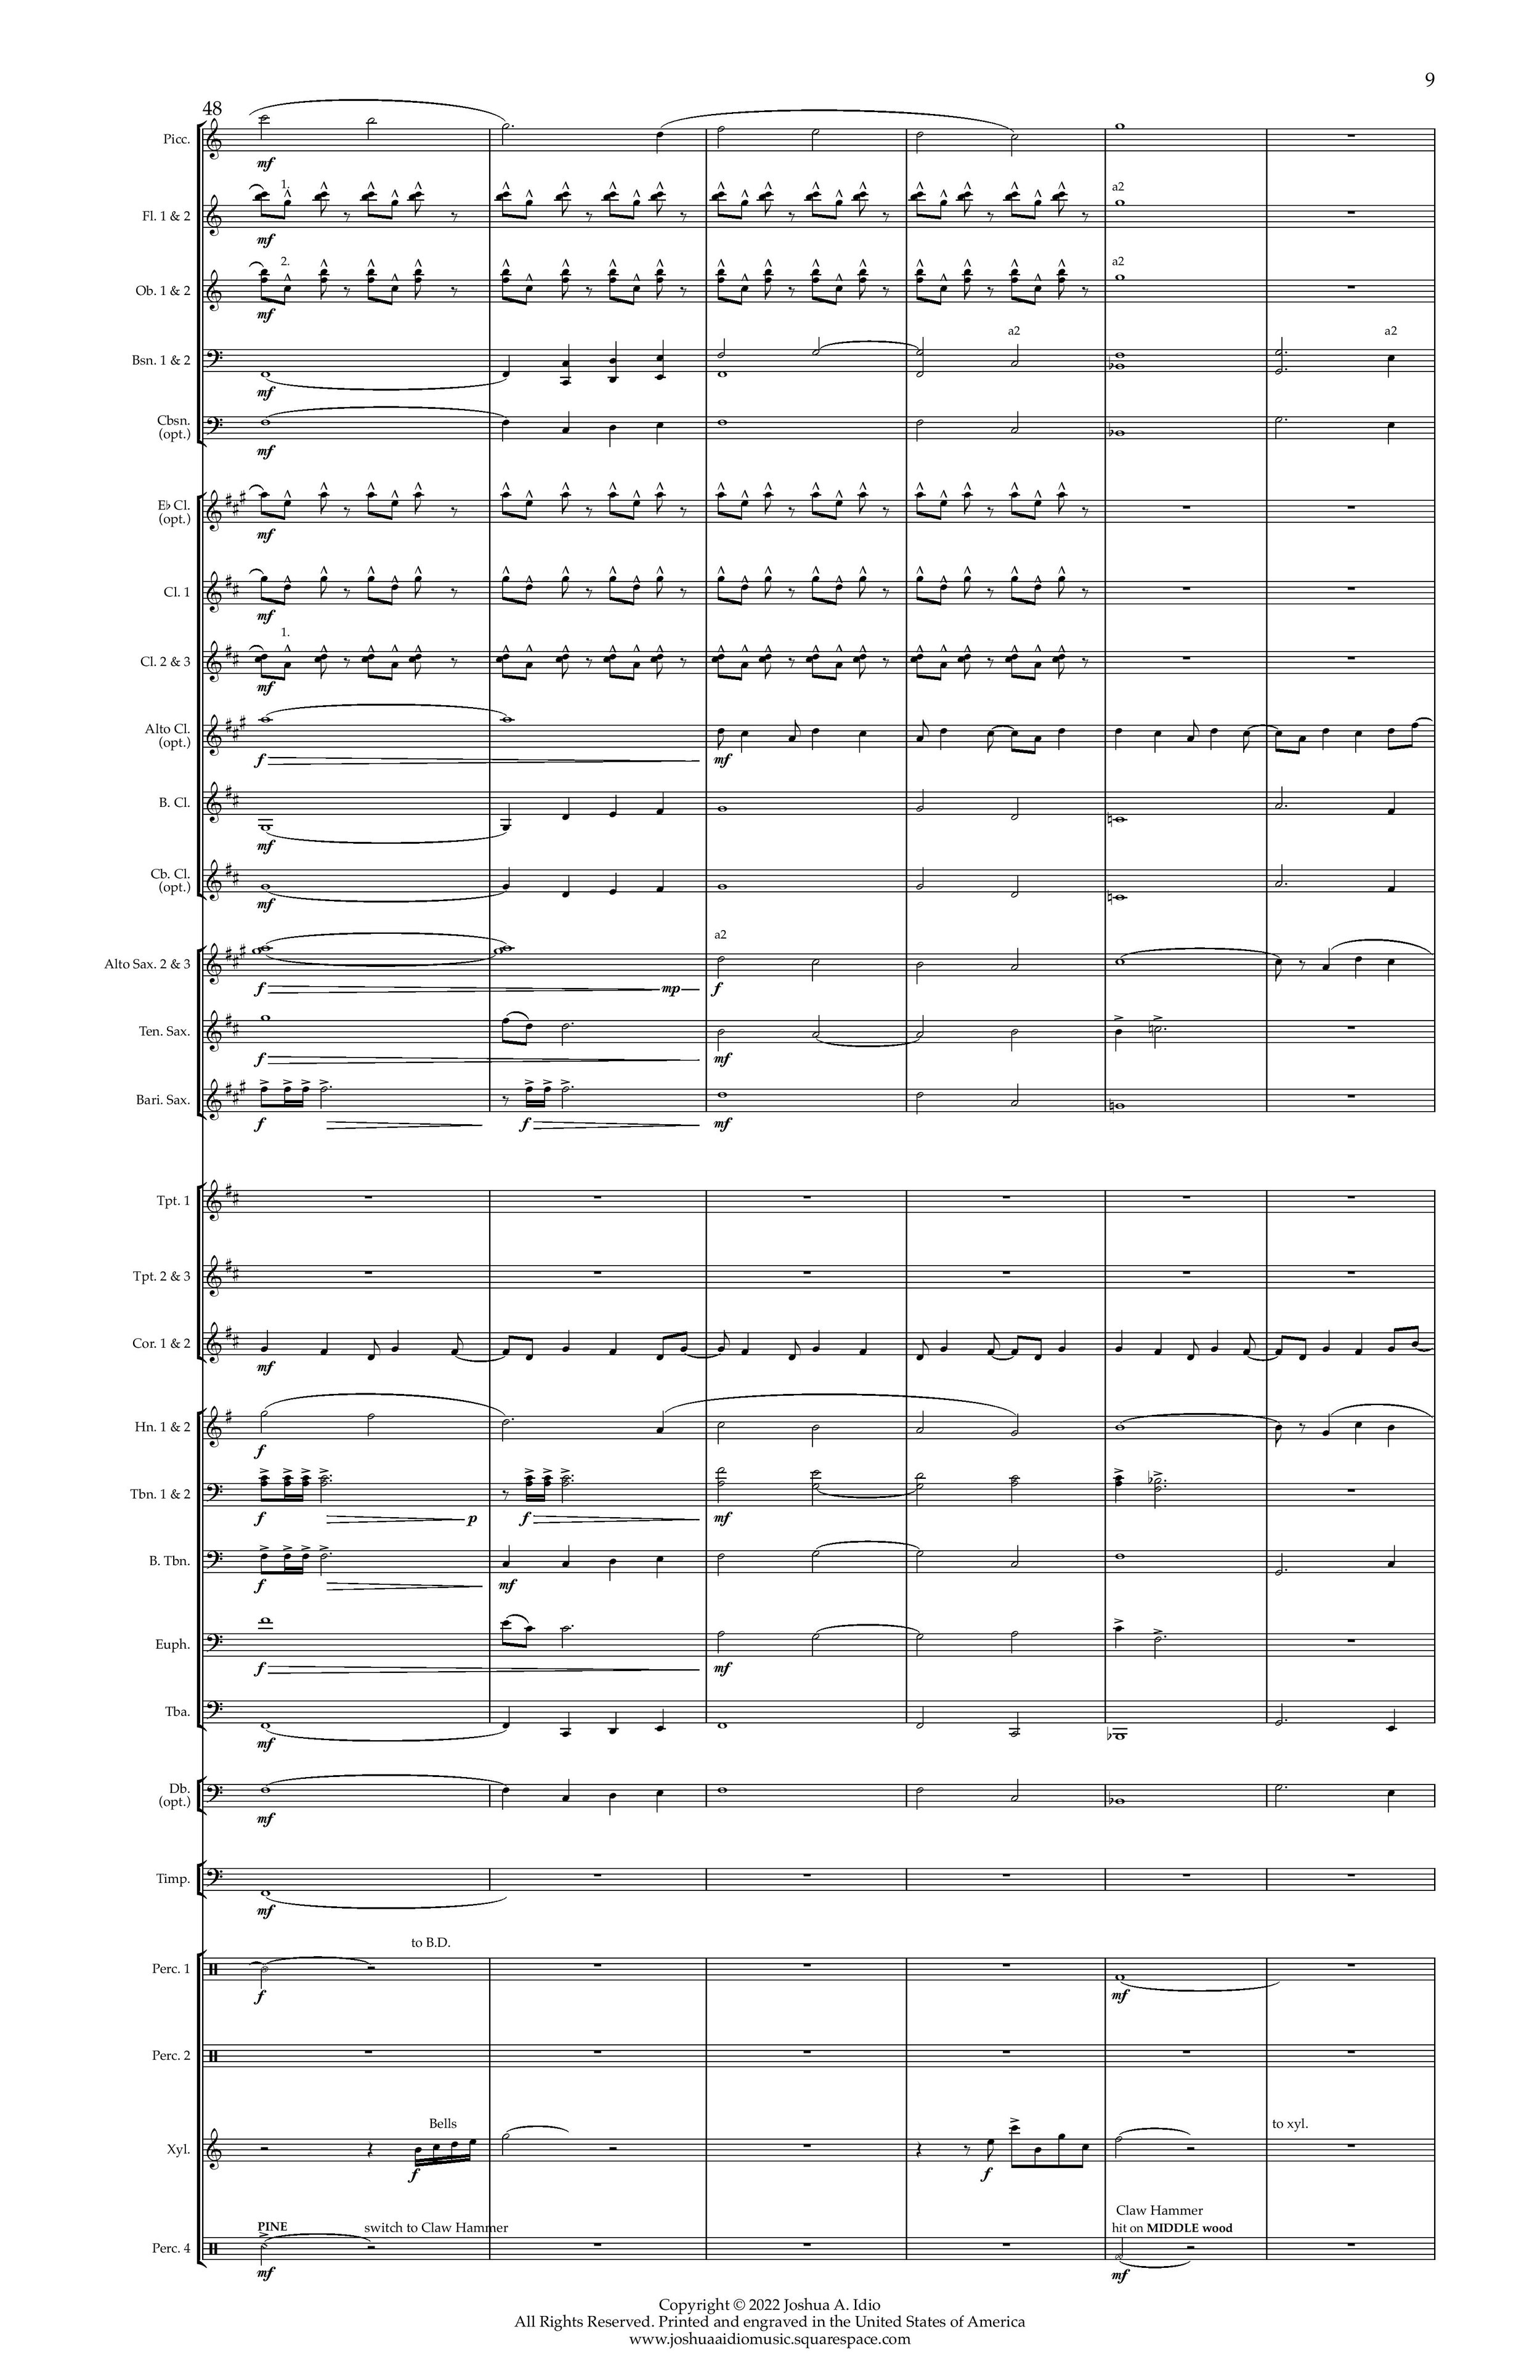 Dreams of an Architect - Conductor s Score-page-009.jpg